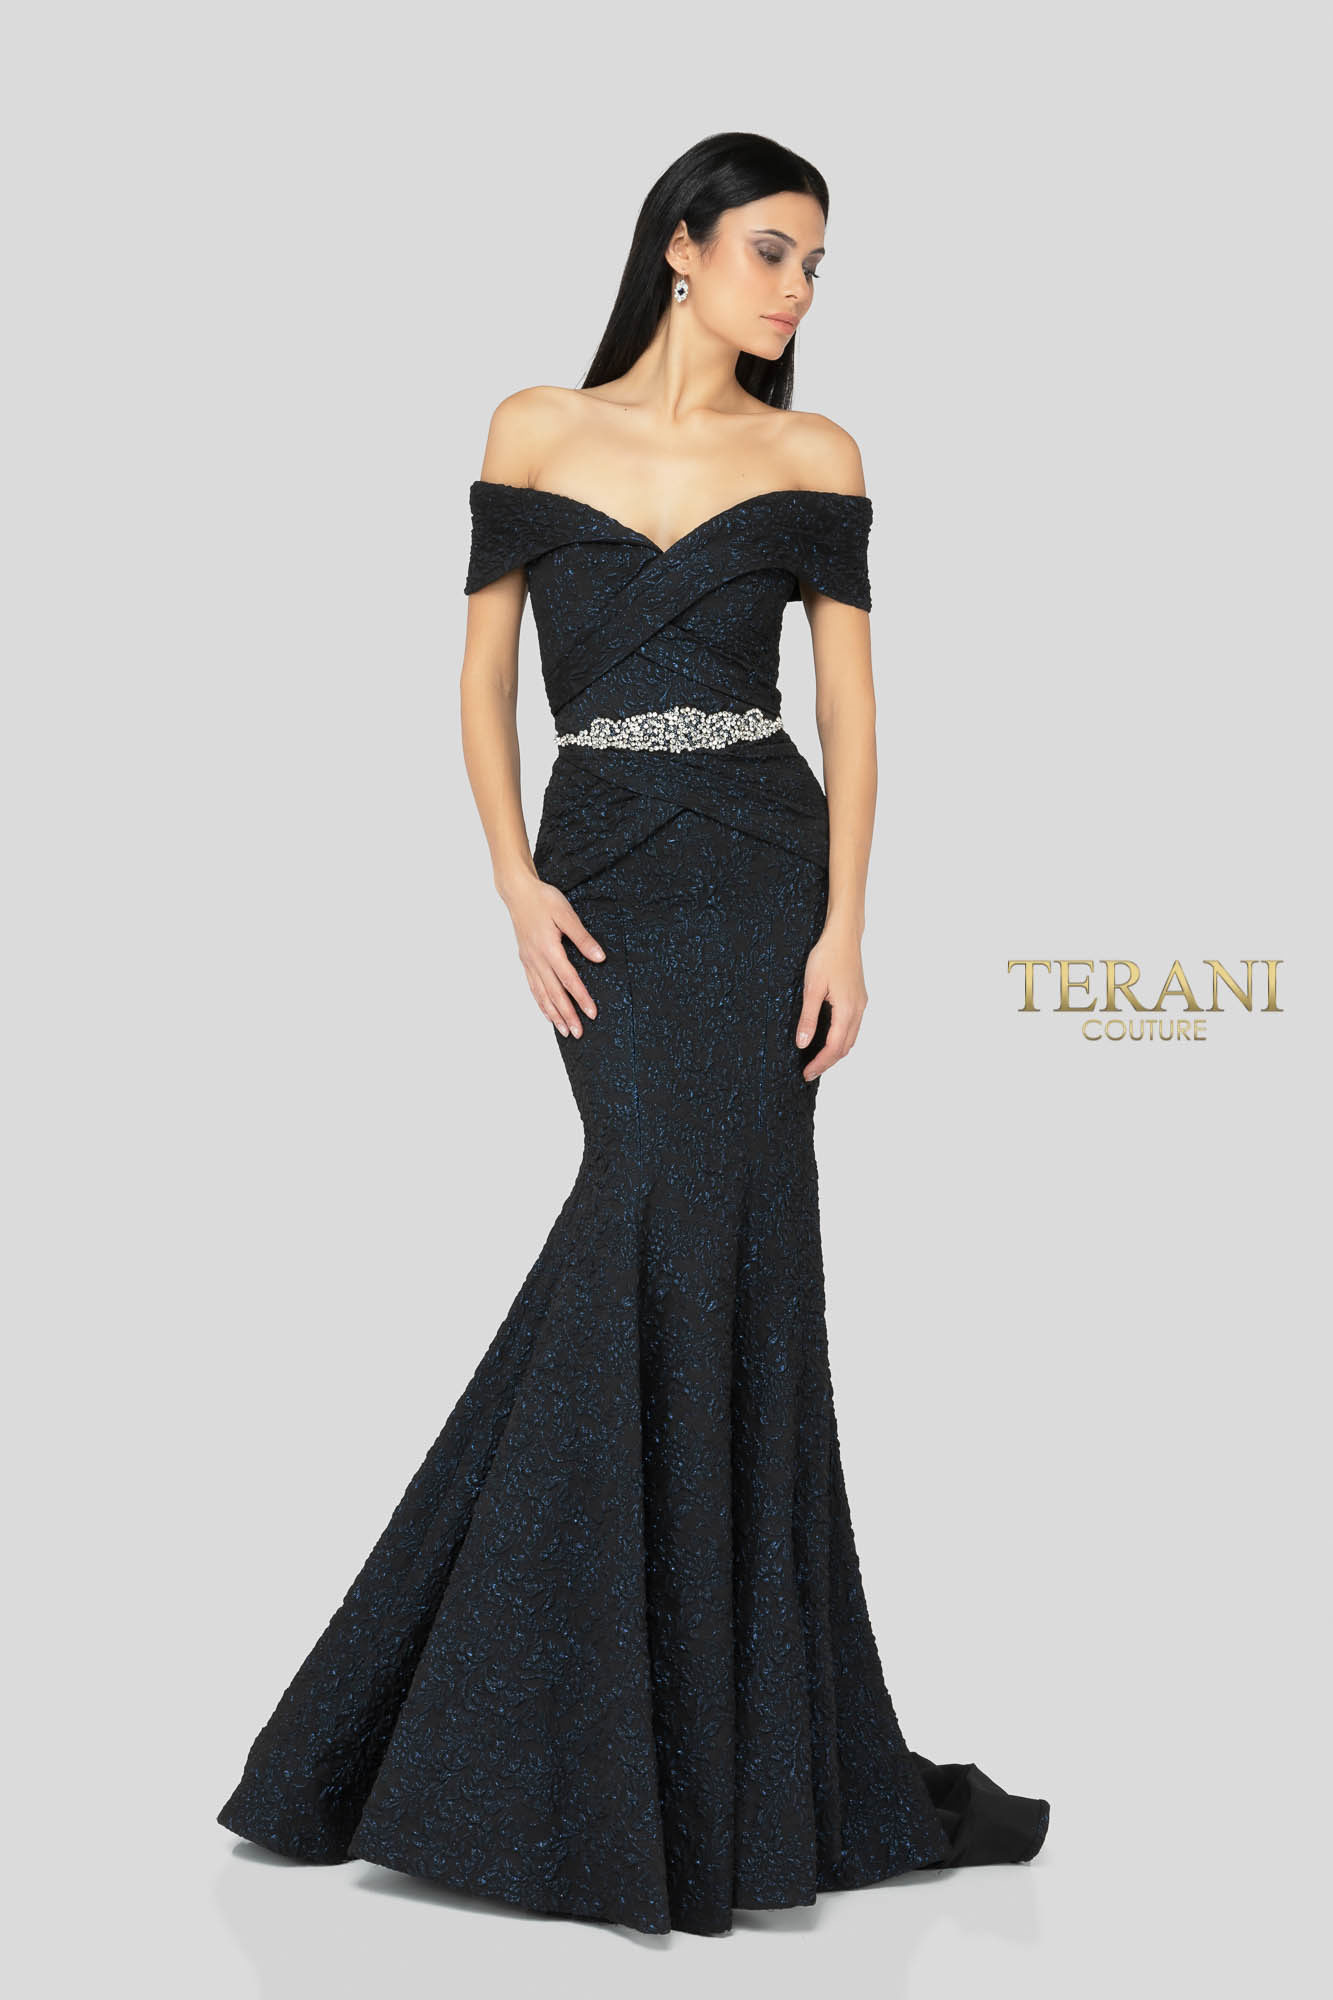 Terani Couture Wedding Evening Dress and Gowns Collection | Bridal